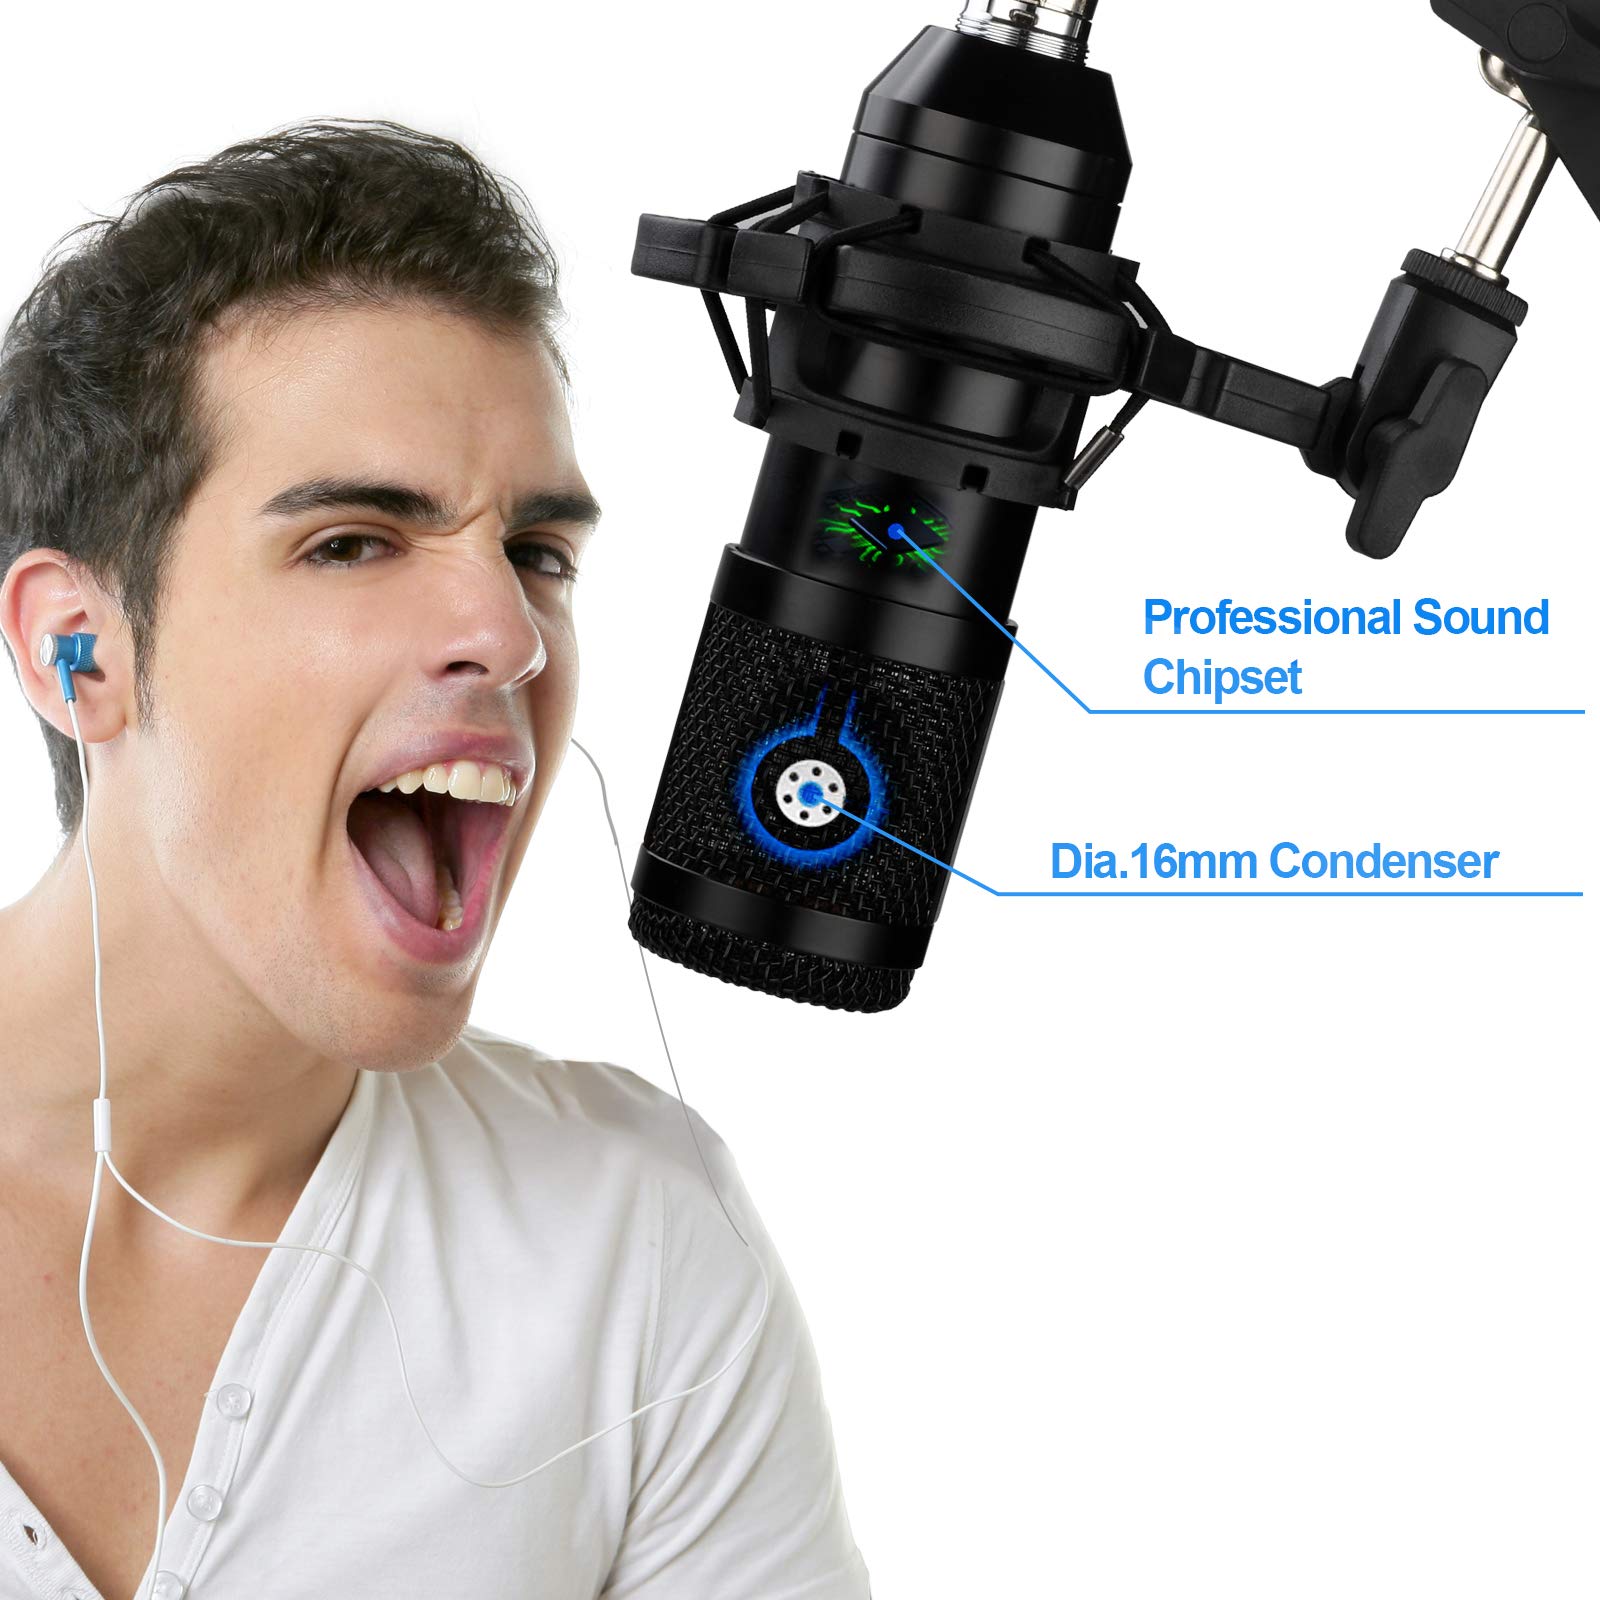 Podcast Microphone Professional 192Khz/24Bit USB Condenser Cardioid PC Mic,  Reco